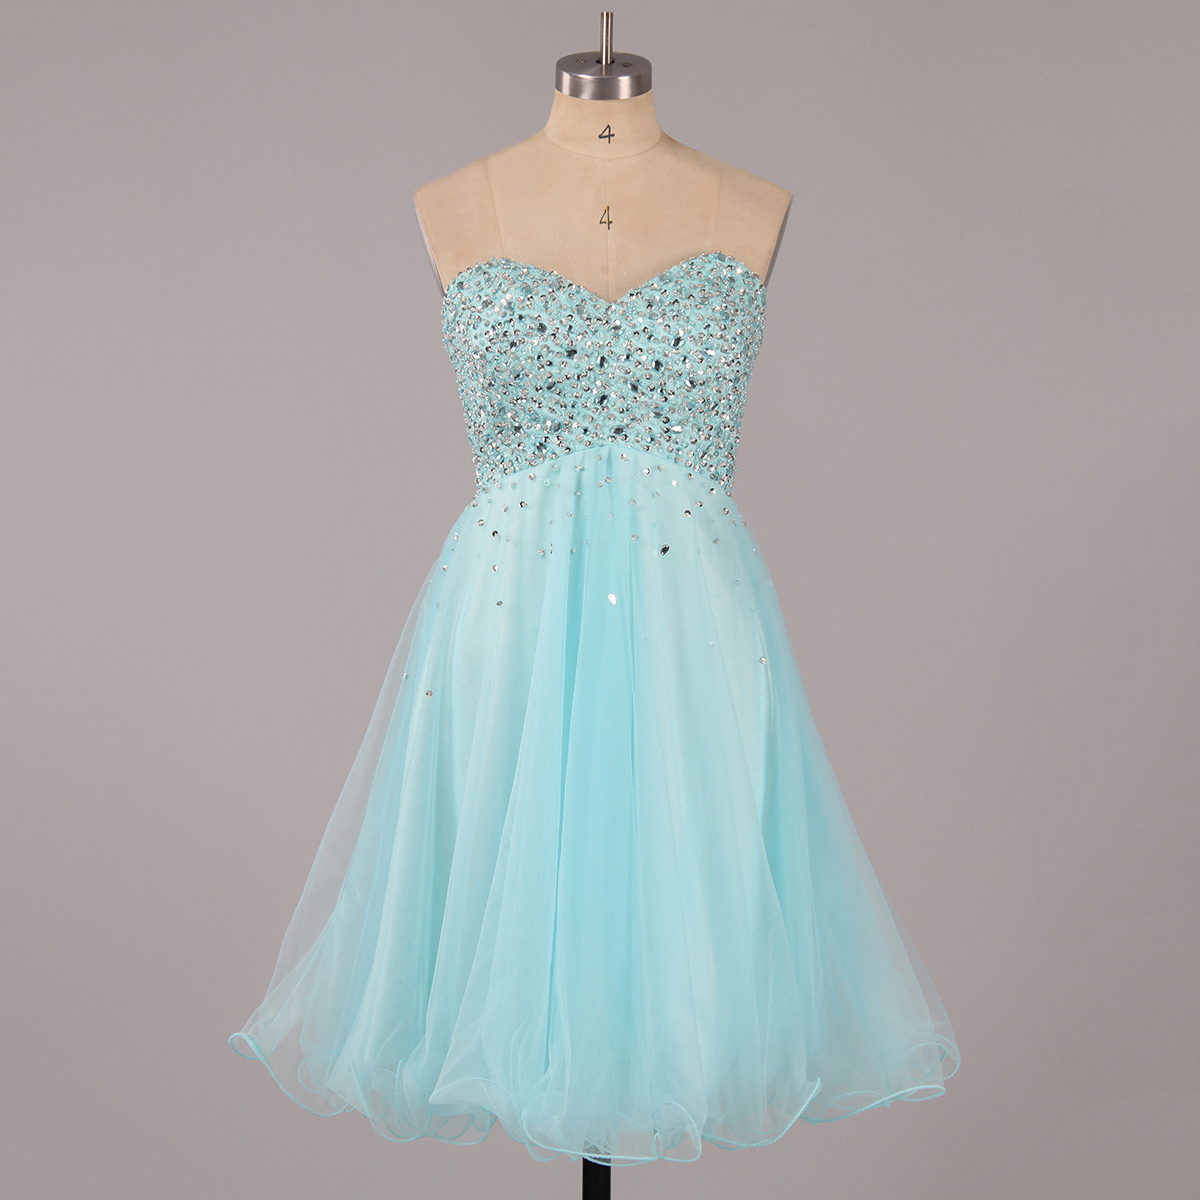 Short Tulle Homecoming Dress, Featuring Beaded Embellished Sweetheart Bodice